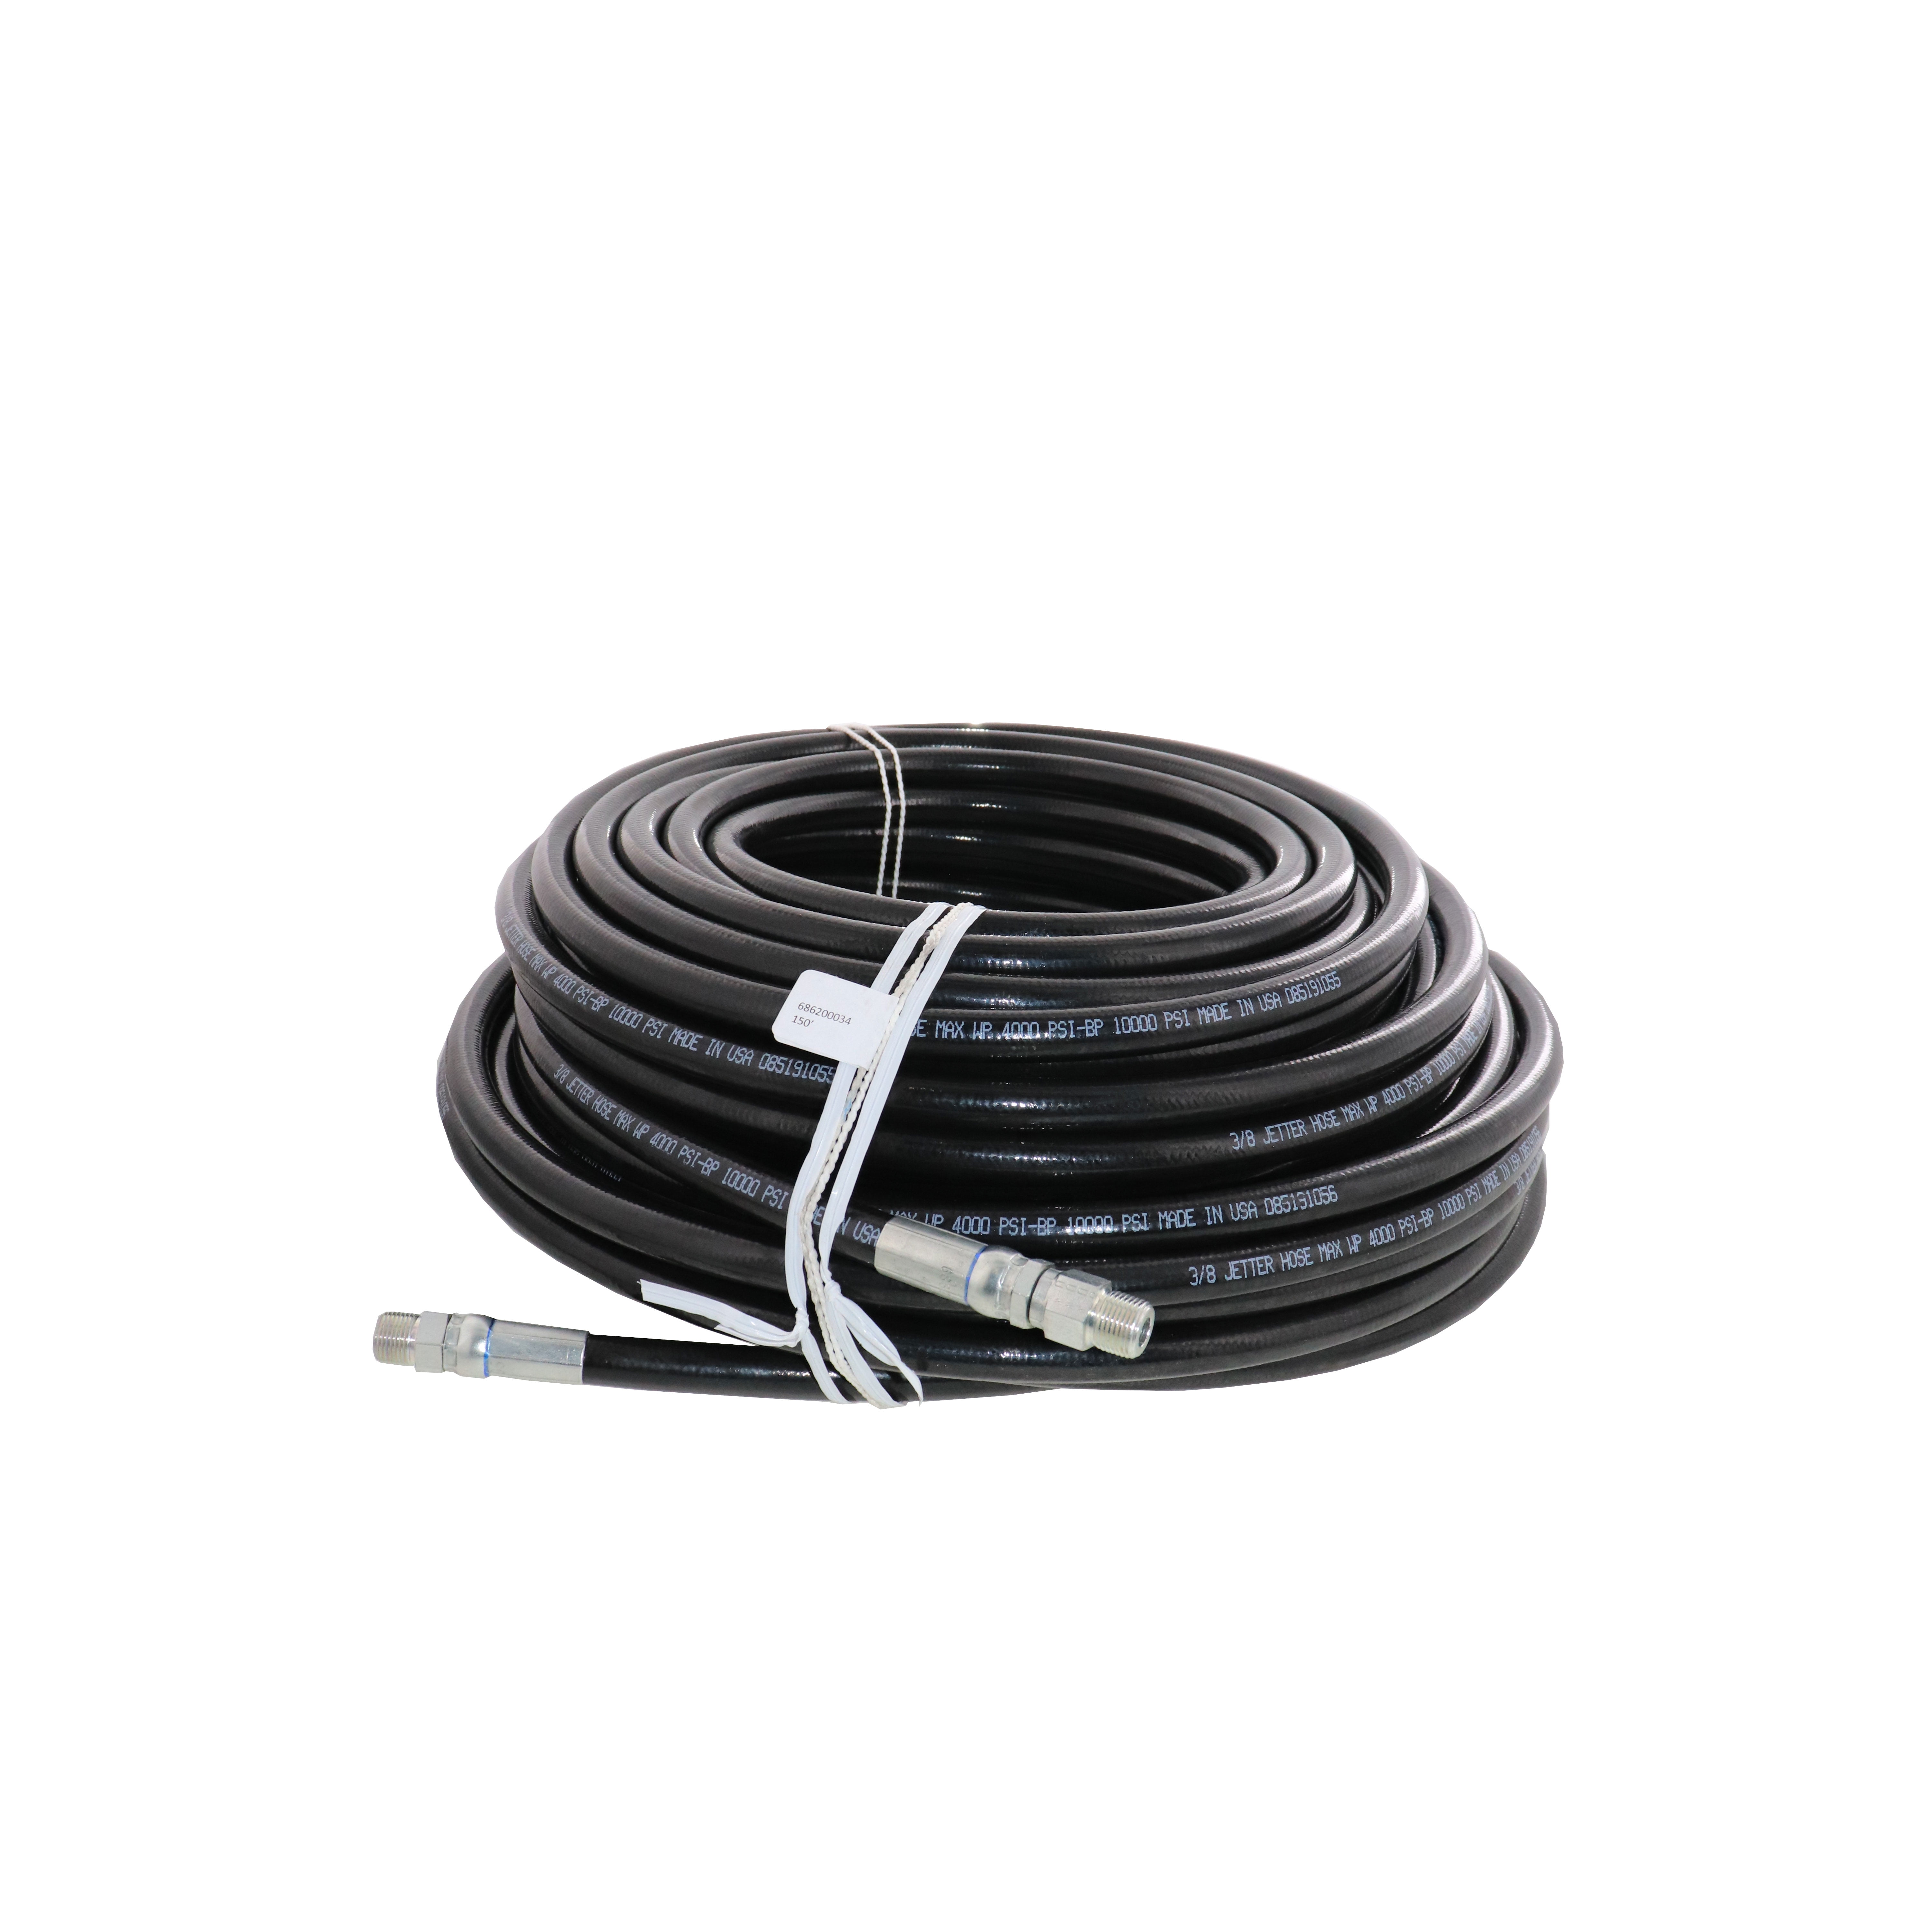 3/8" x 100' Sewer Cleaning Jetter Hose 4000 PSI 